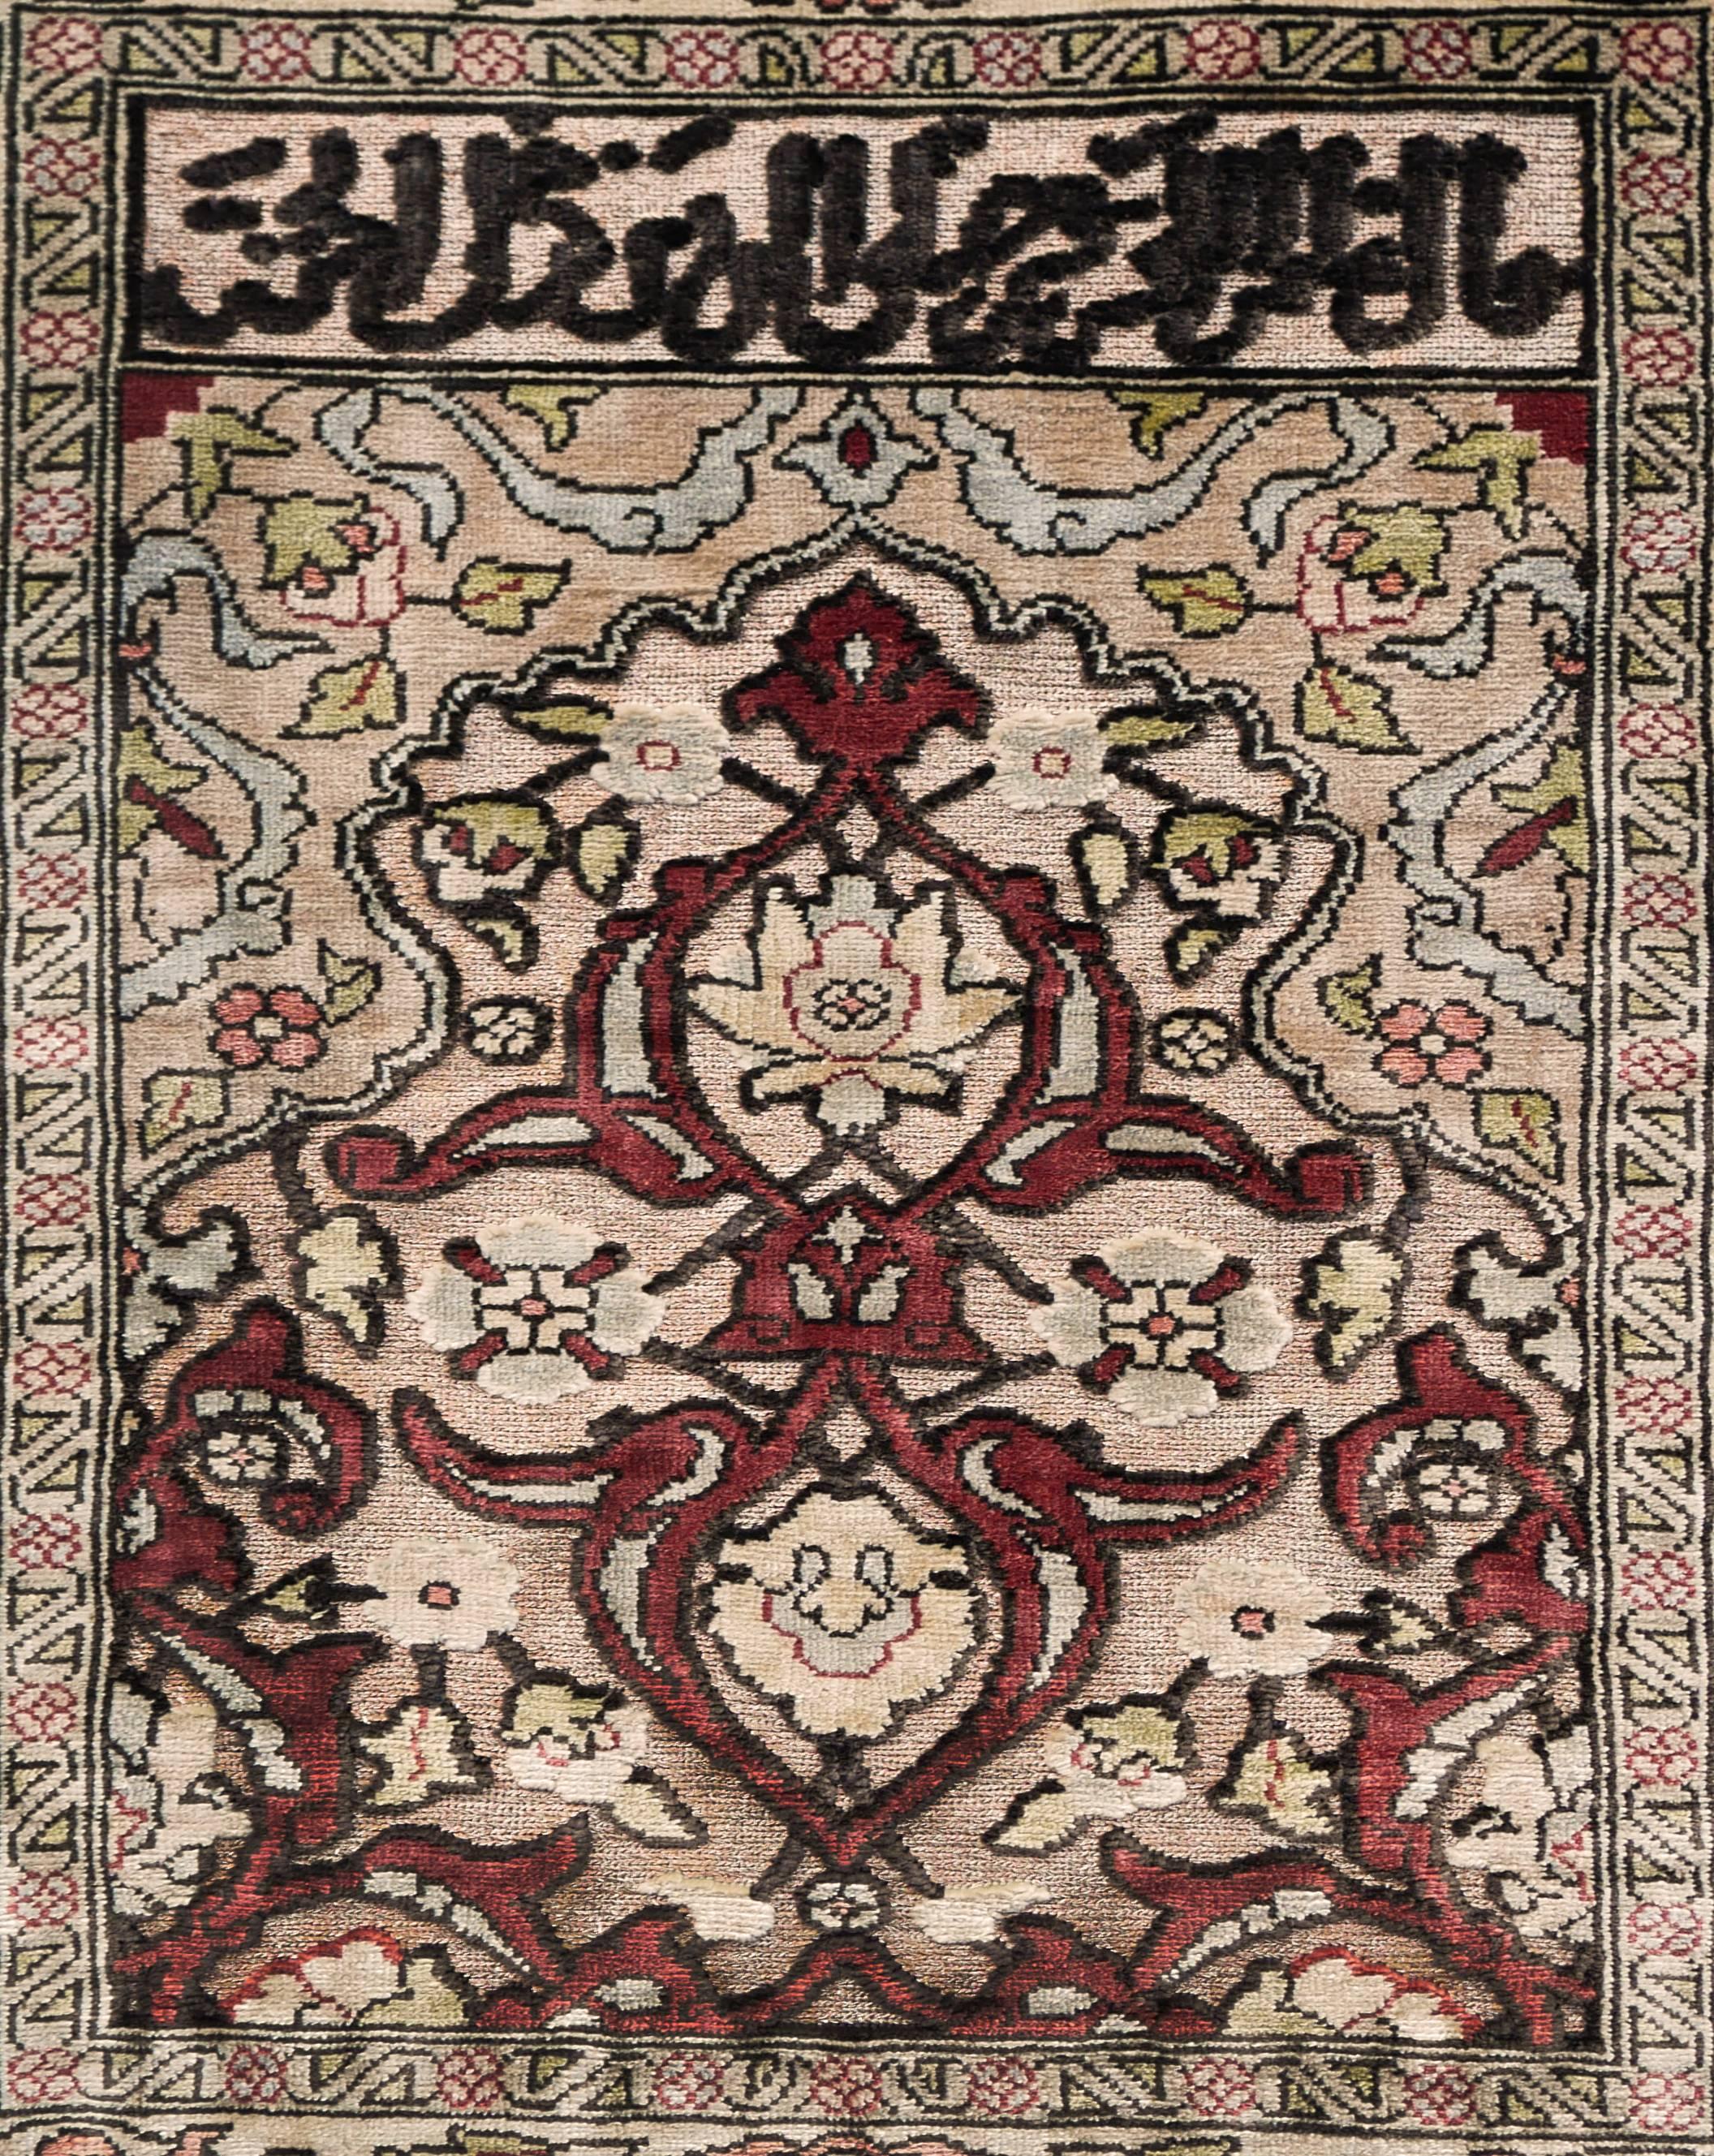 This is a stunning small hand-knotted Turkish Hereke Özipek rug in all natural Bergama silk aged approximate 20-25 years 
The condition of this vintage rug is exceptional. 
1 000 000 KPSQ 
Measurements: circa 46 x 38 cm or circa 18 by 15 inches